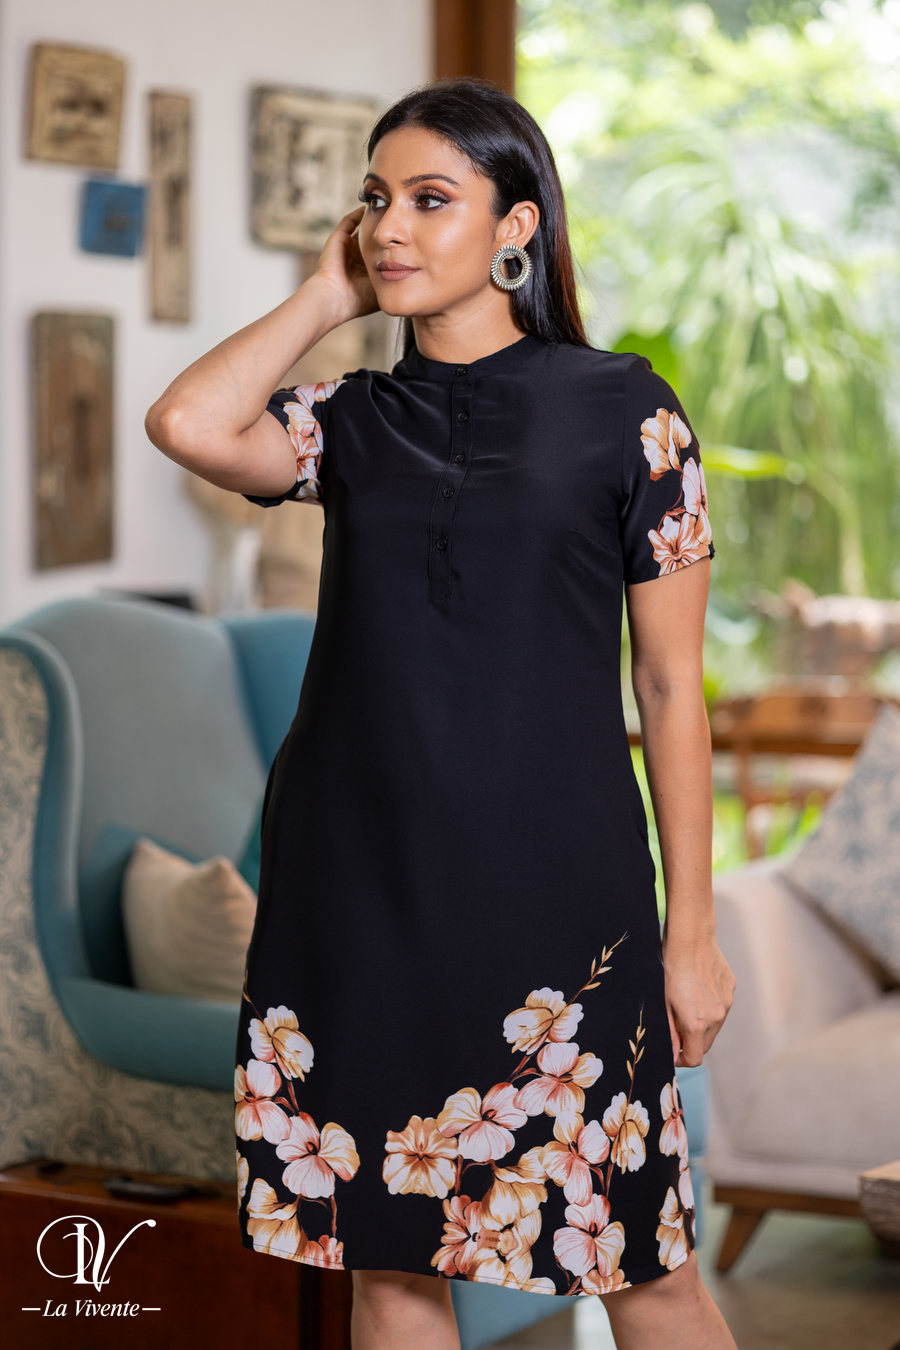 Floral Patterned Chinese Collared Short Shirt Dress - La Vivente